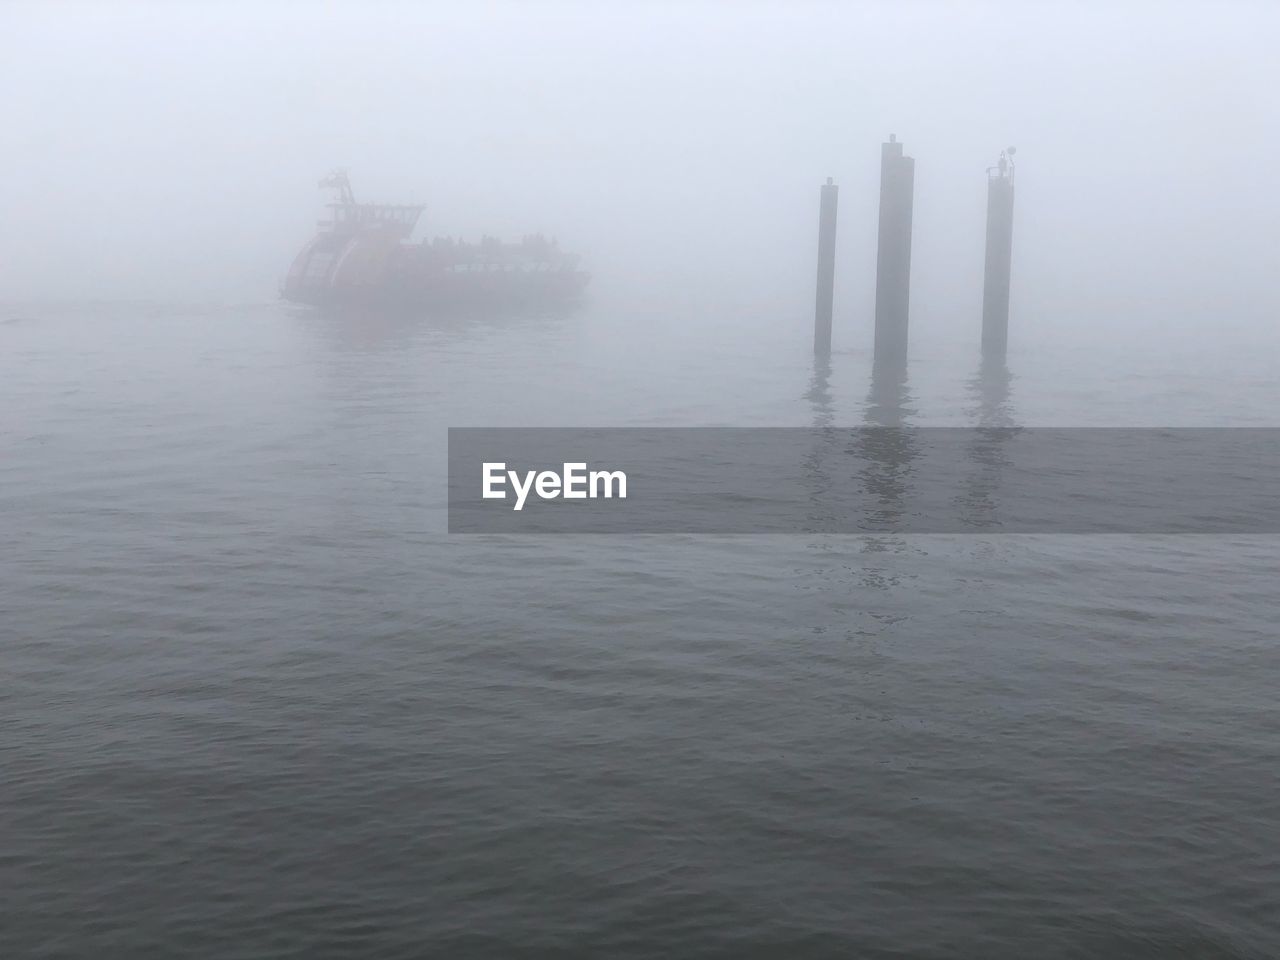 SEA IN FOGGY WEATHER